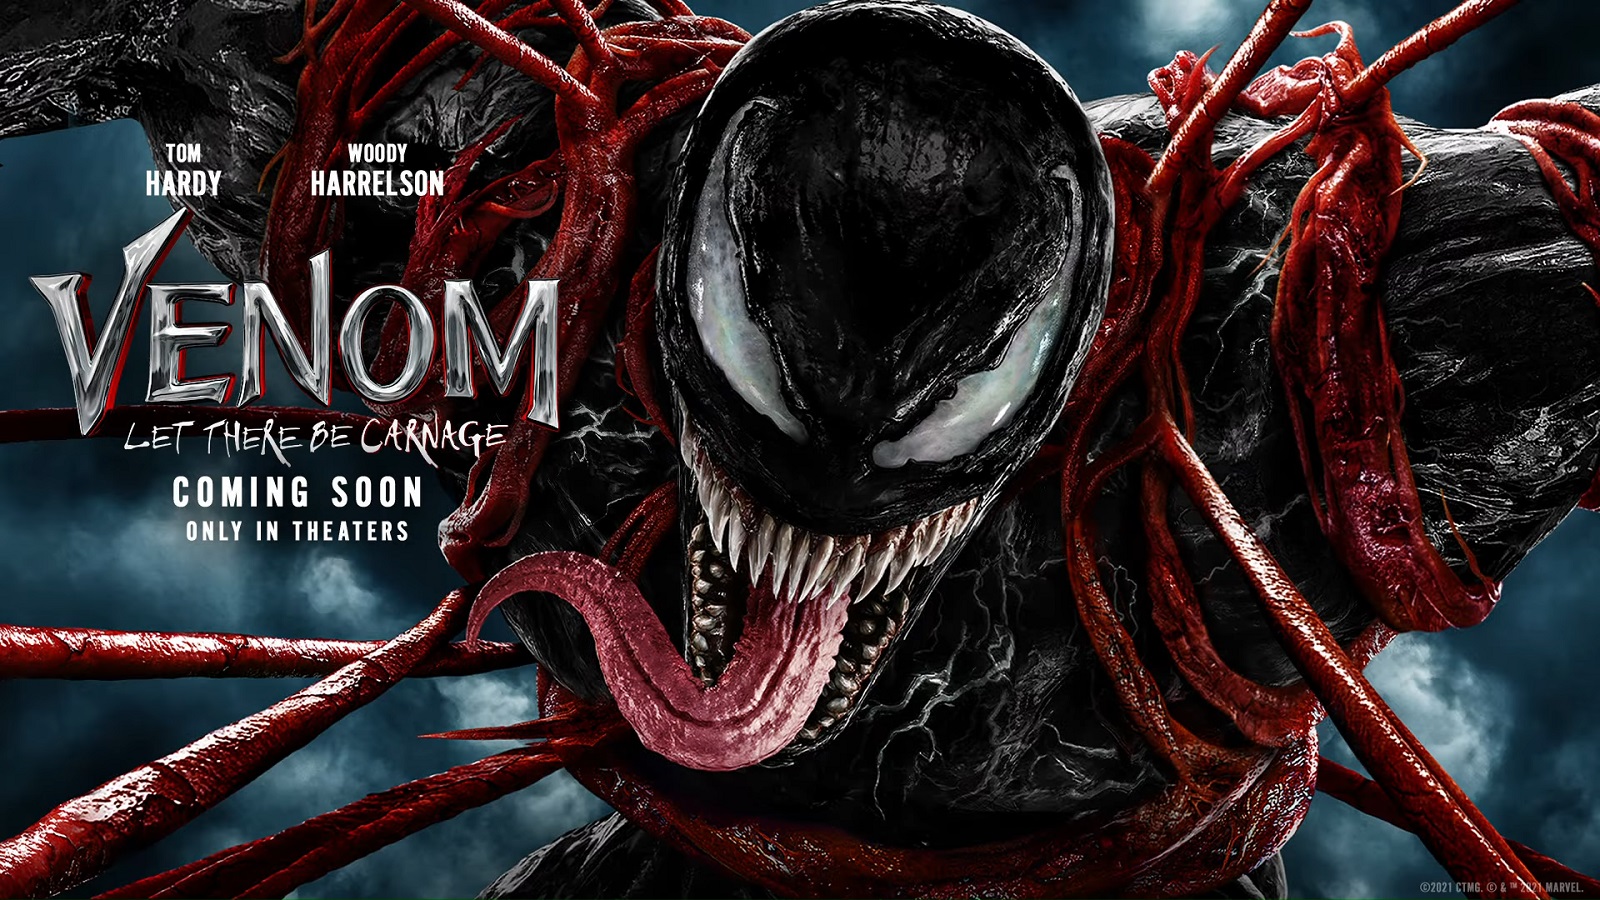 ‘Venom Let There Be Carnage’ trailer definitely lives up to its name • BGR